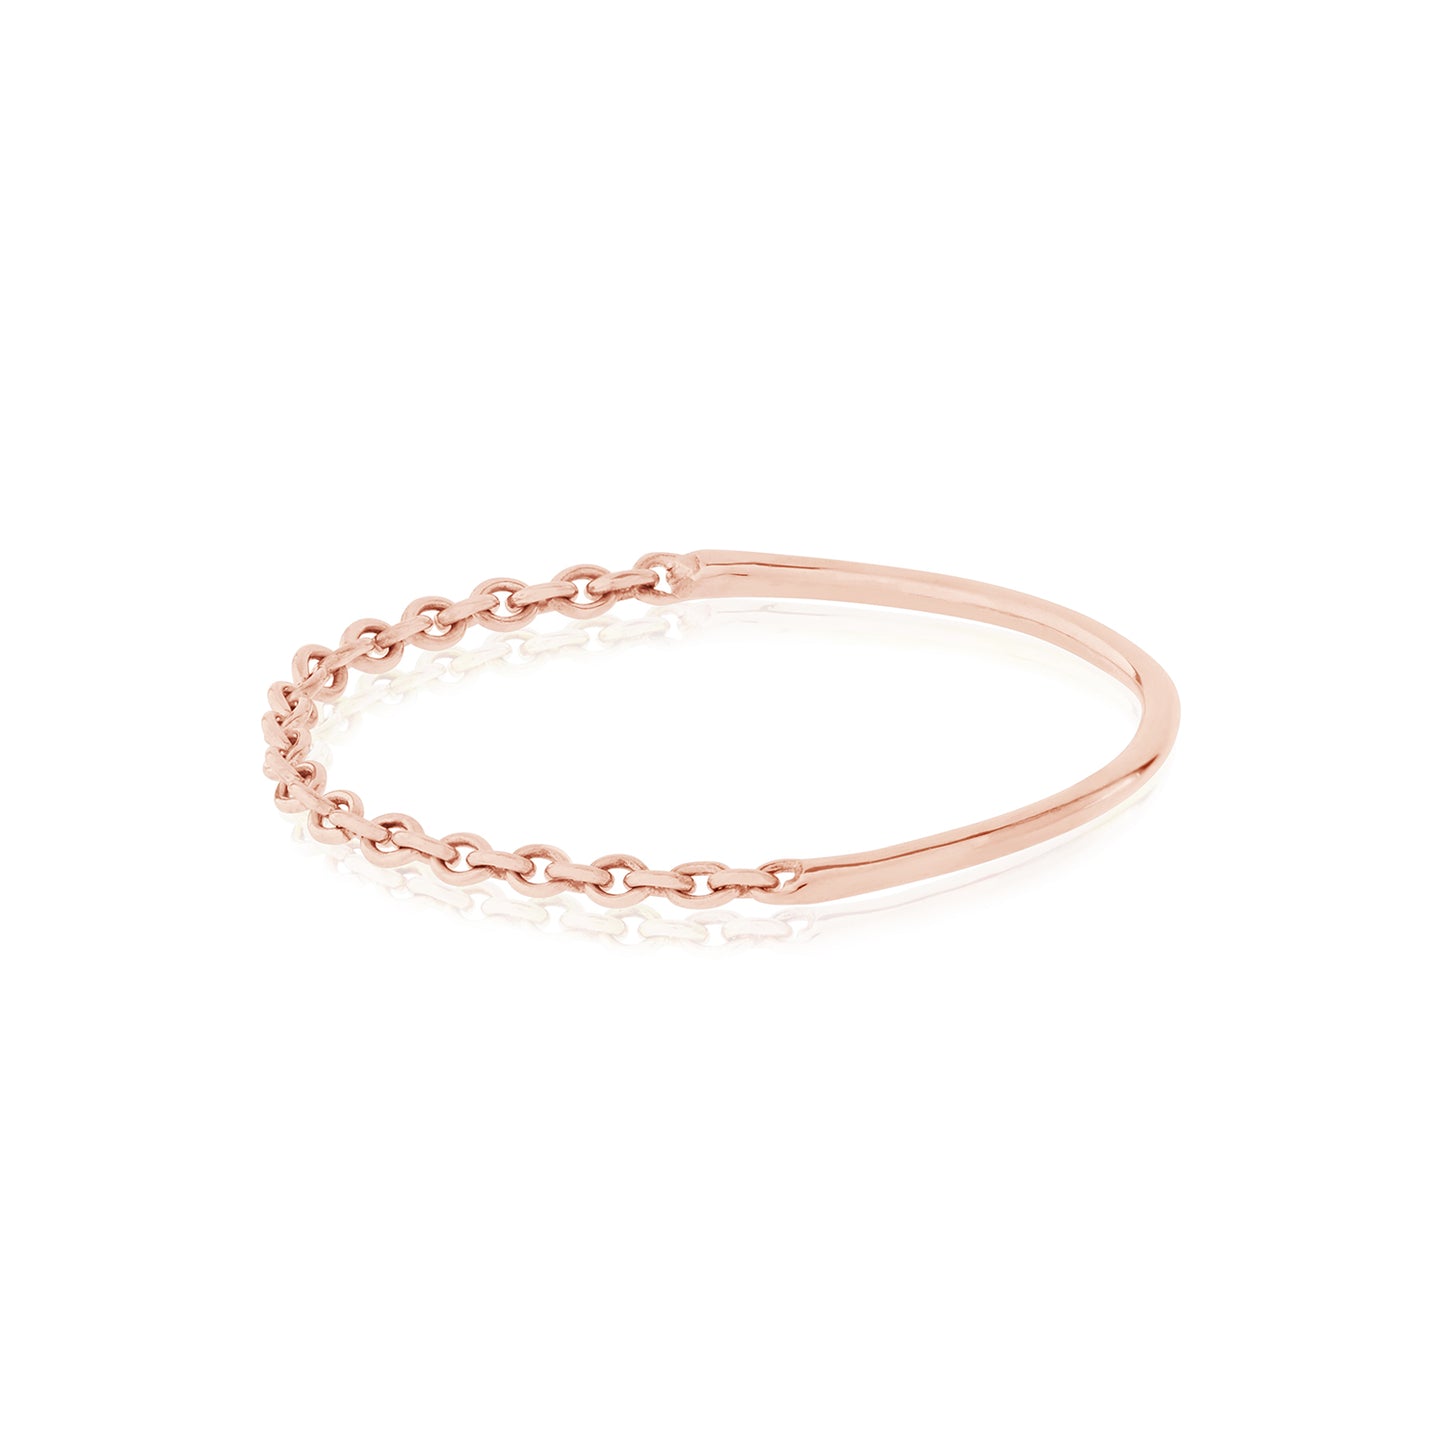 18ct Rose Gold Half Moon Ring by McFarlane Fine Jewellery 